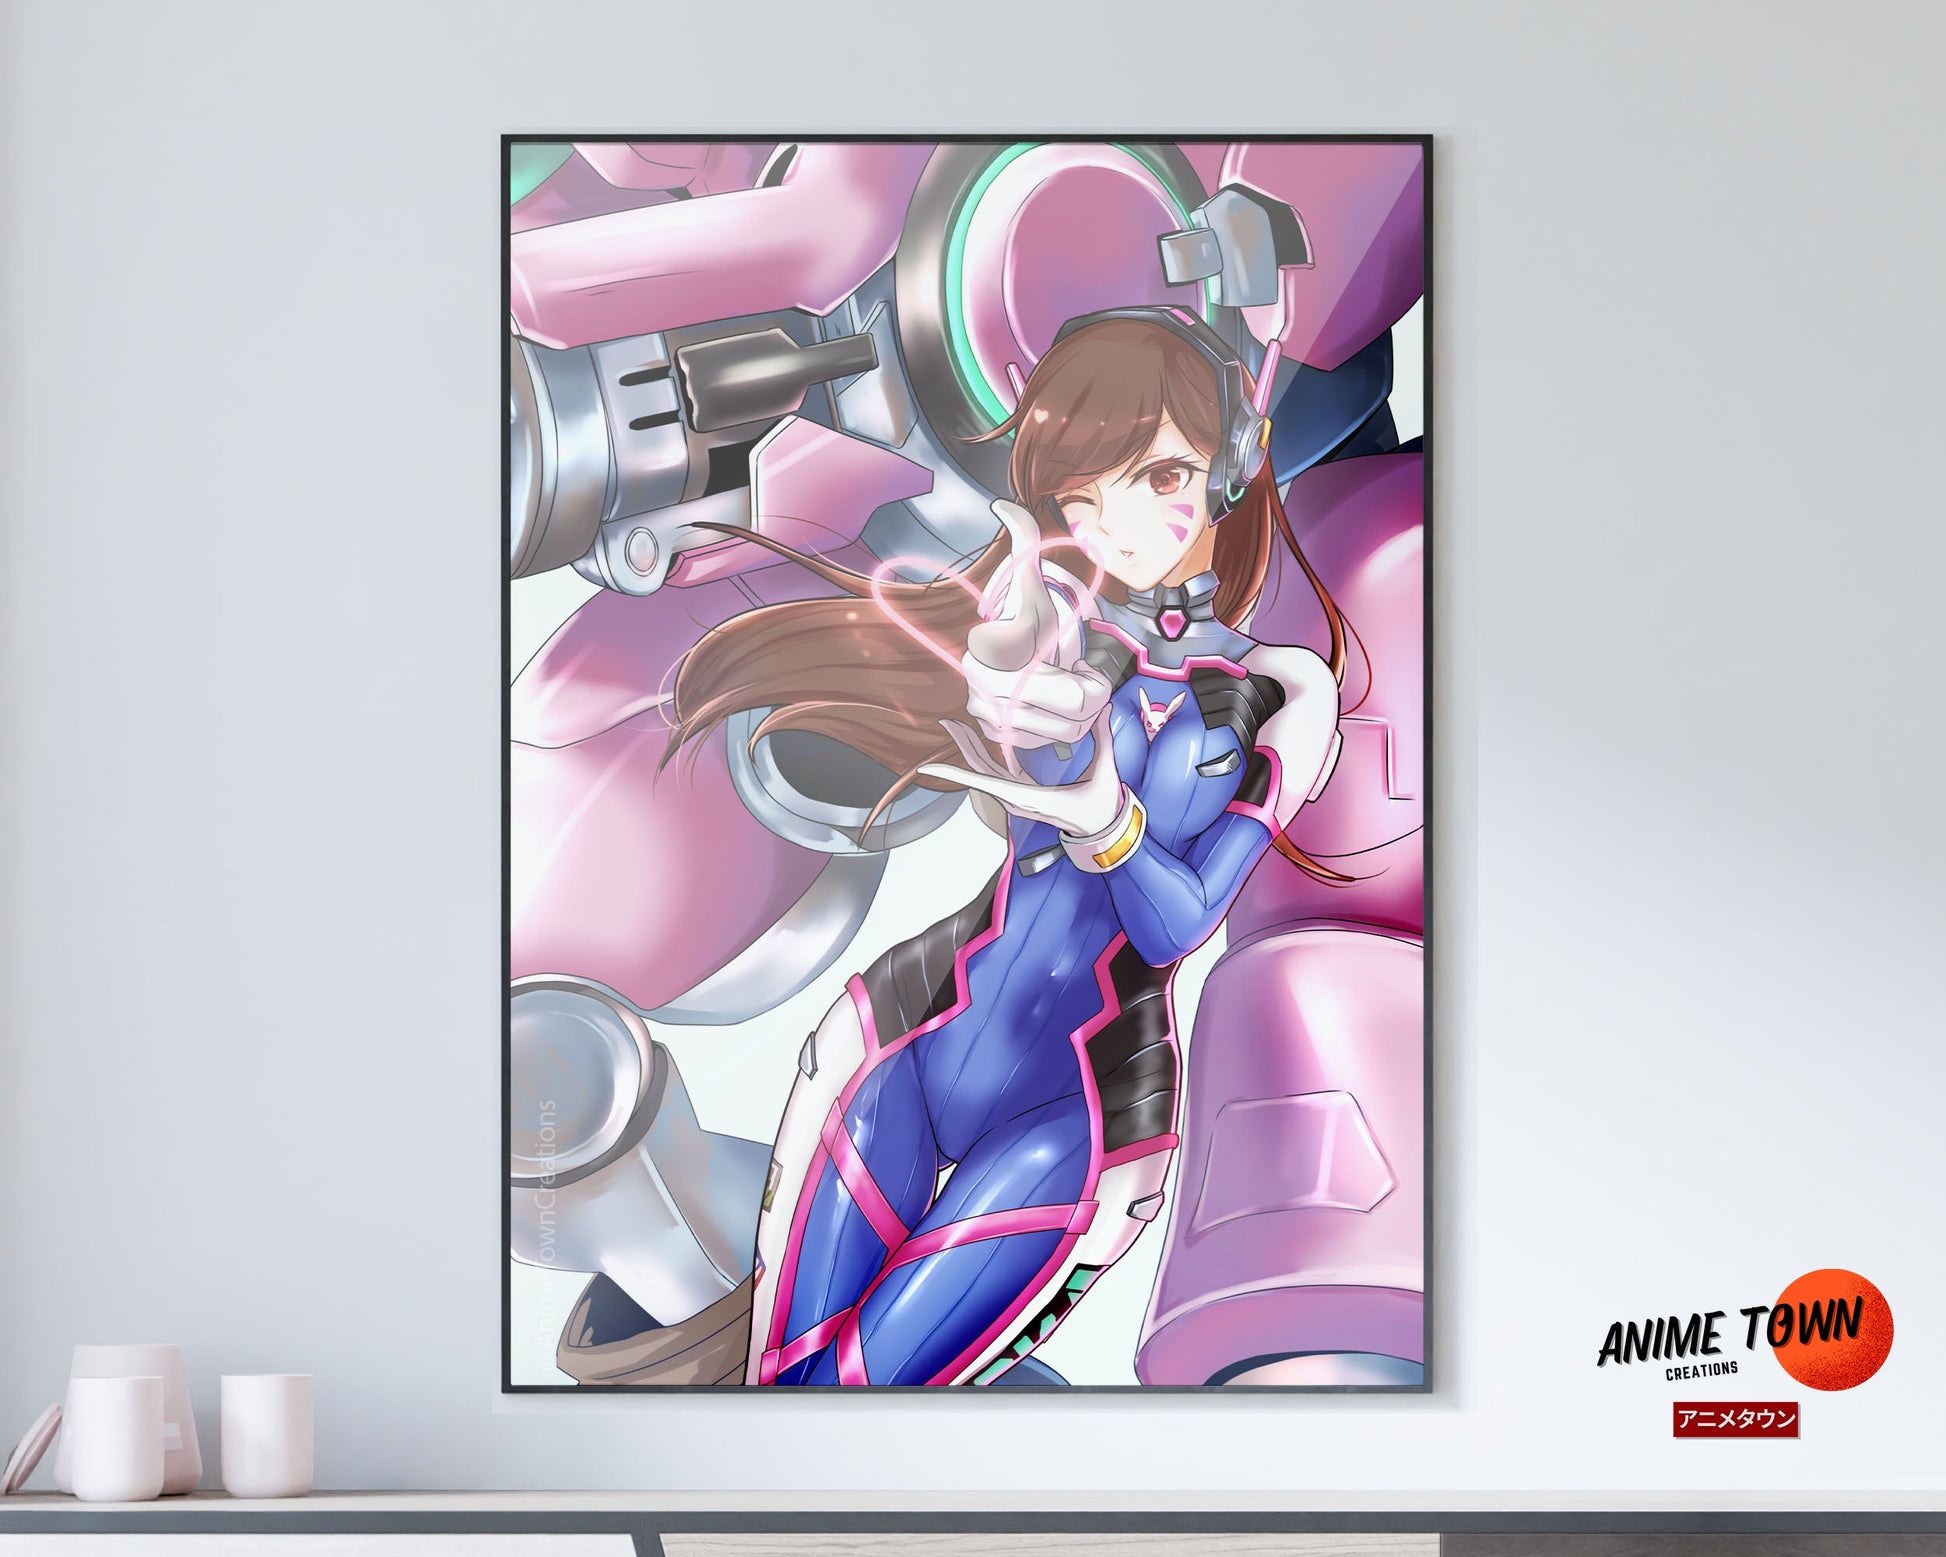 Anime Town Creations Poster Overwatch D.Va 5" x 7" Home Goods - Anime Overwatch Poster